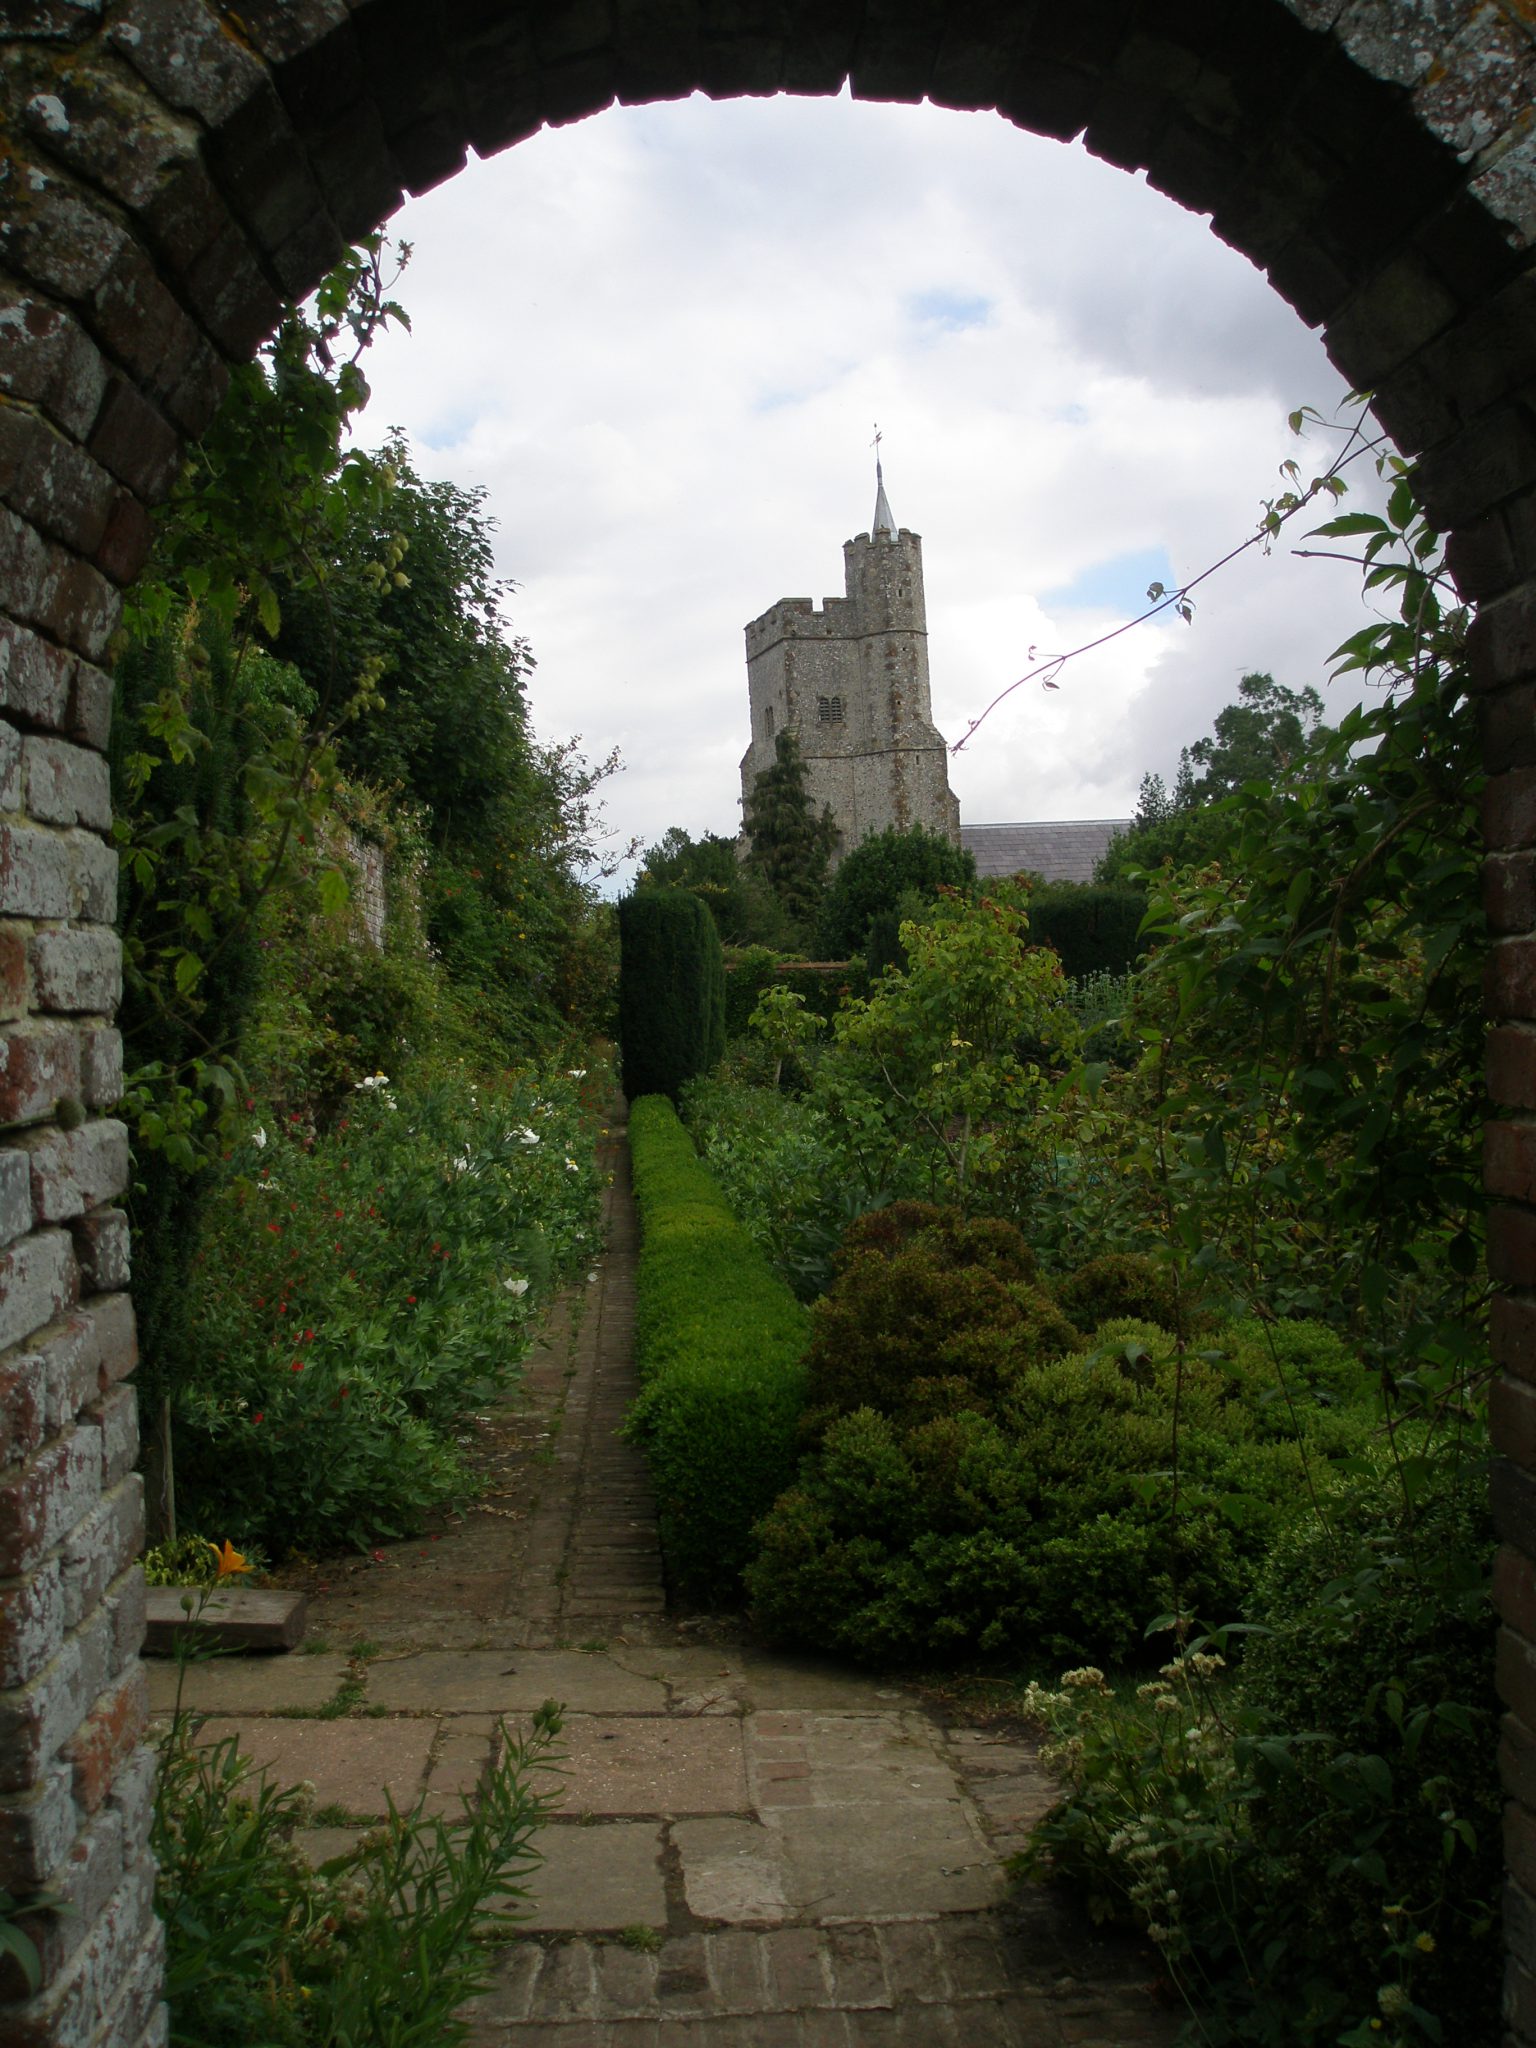 A closer look at the church tower, from within the Walled Garden.